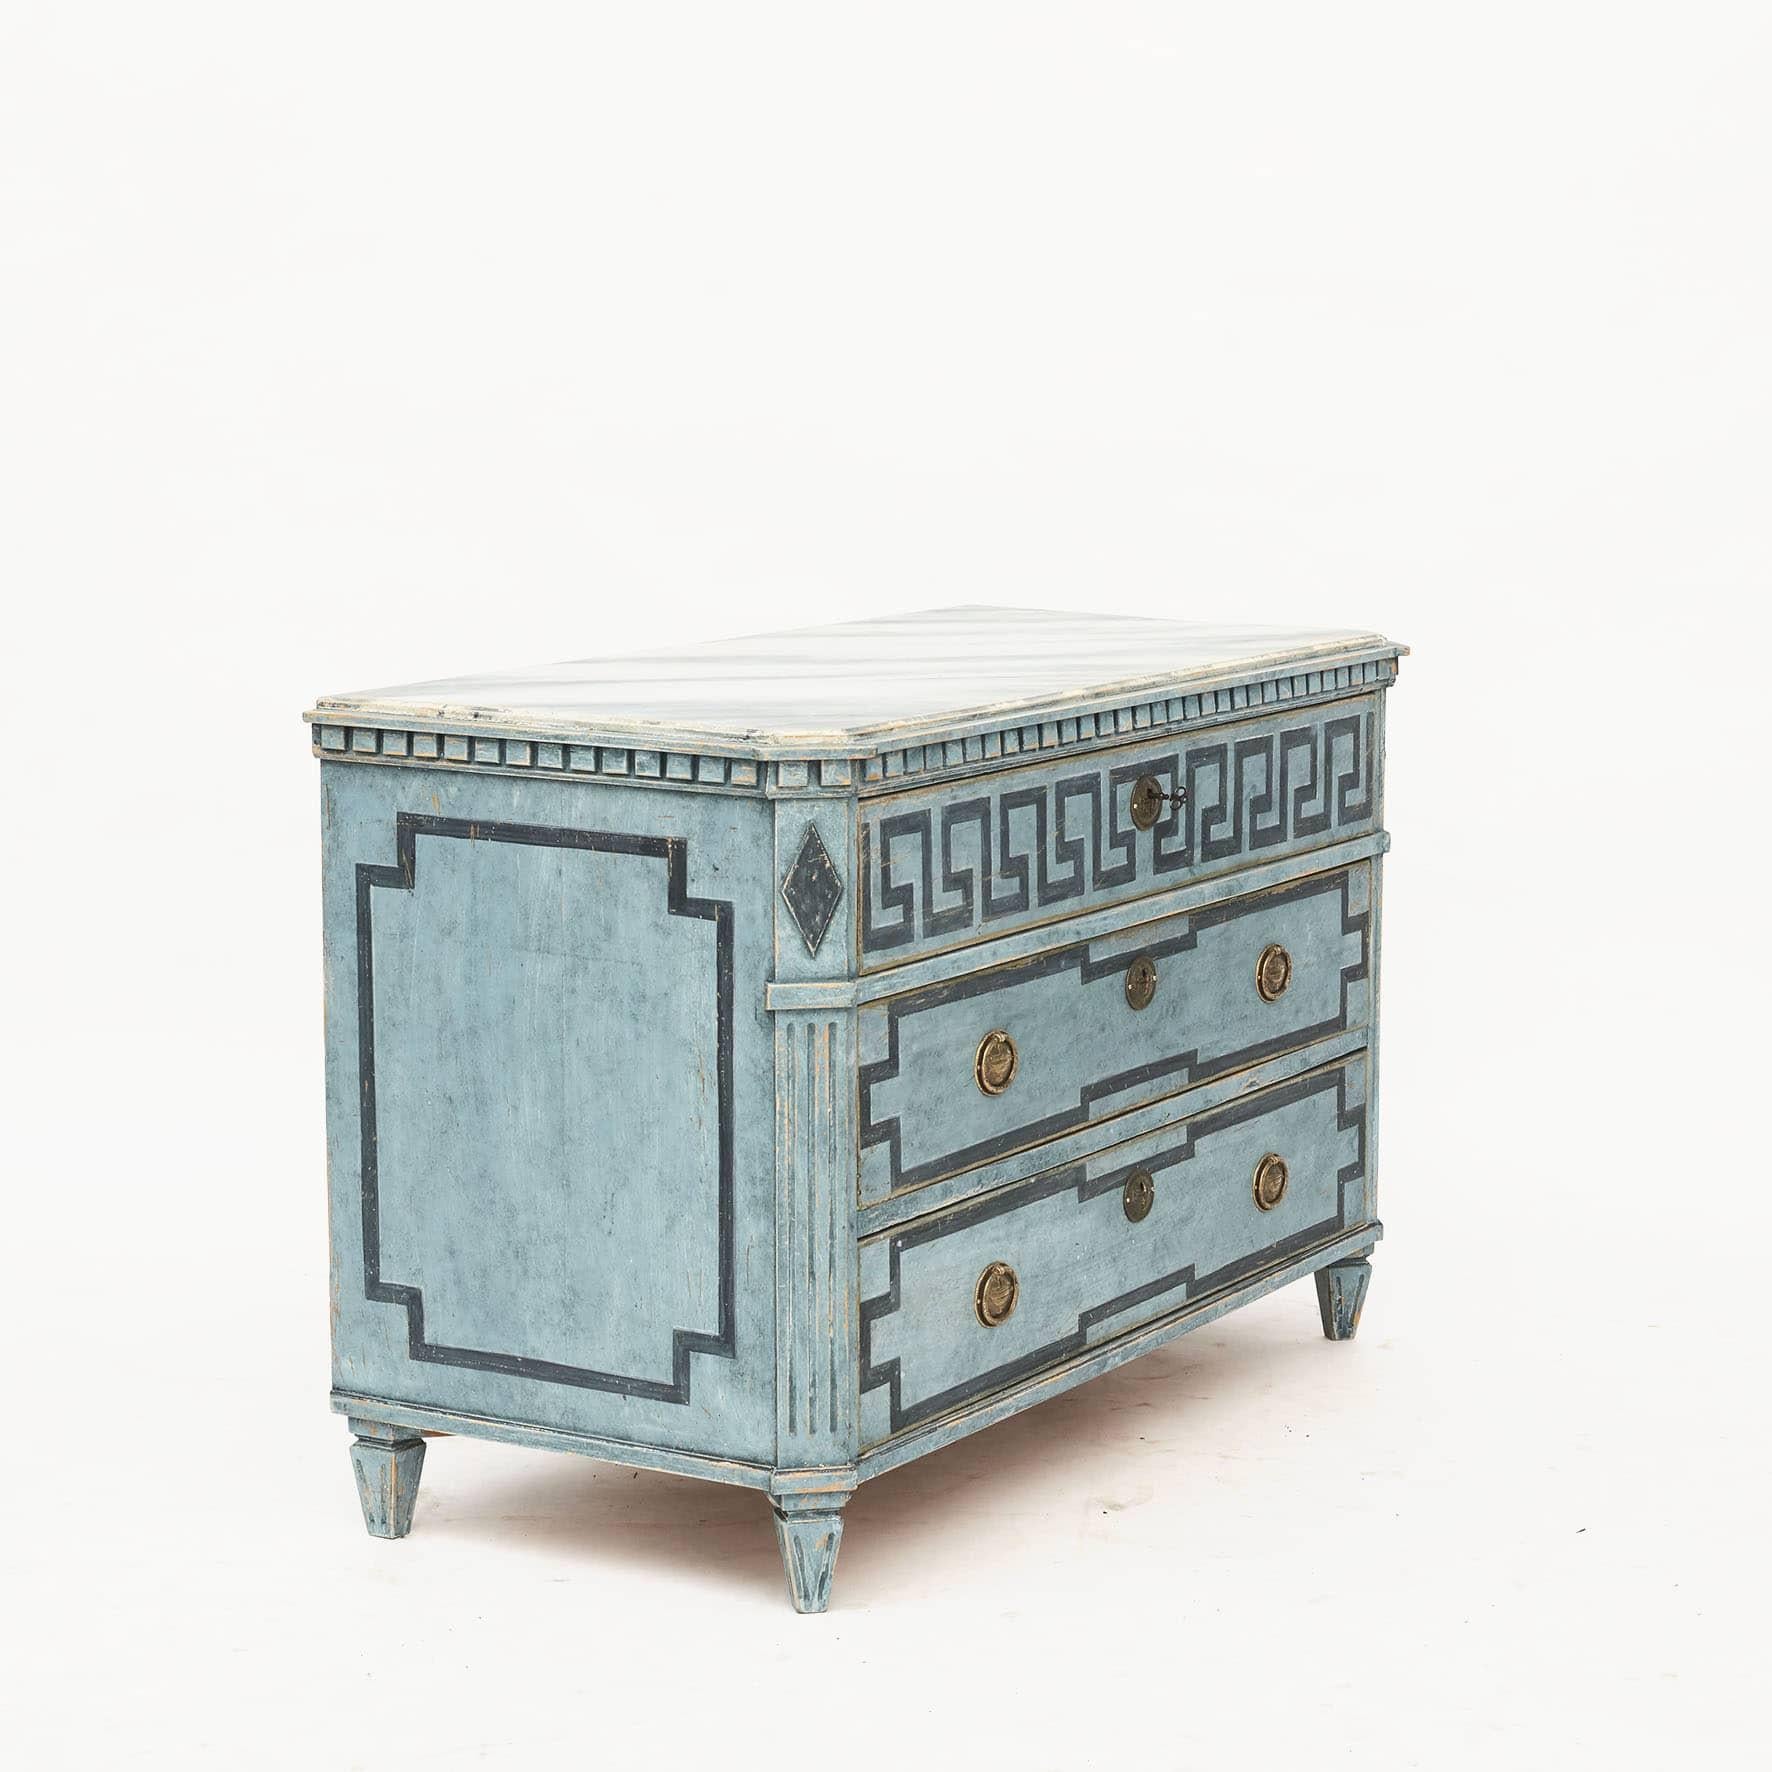 A decorative Swedish Gustavian style chest of drawers painted in blue shades. Wooden gray faux marbled tabletop.
Three drawer, upper drawer decorated with 